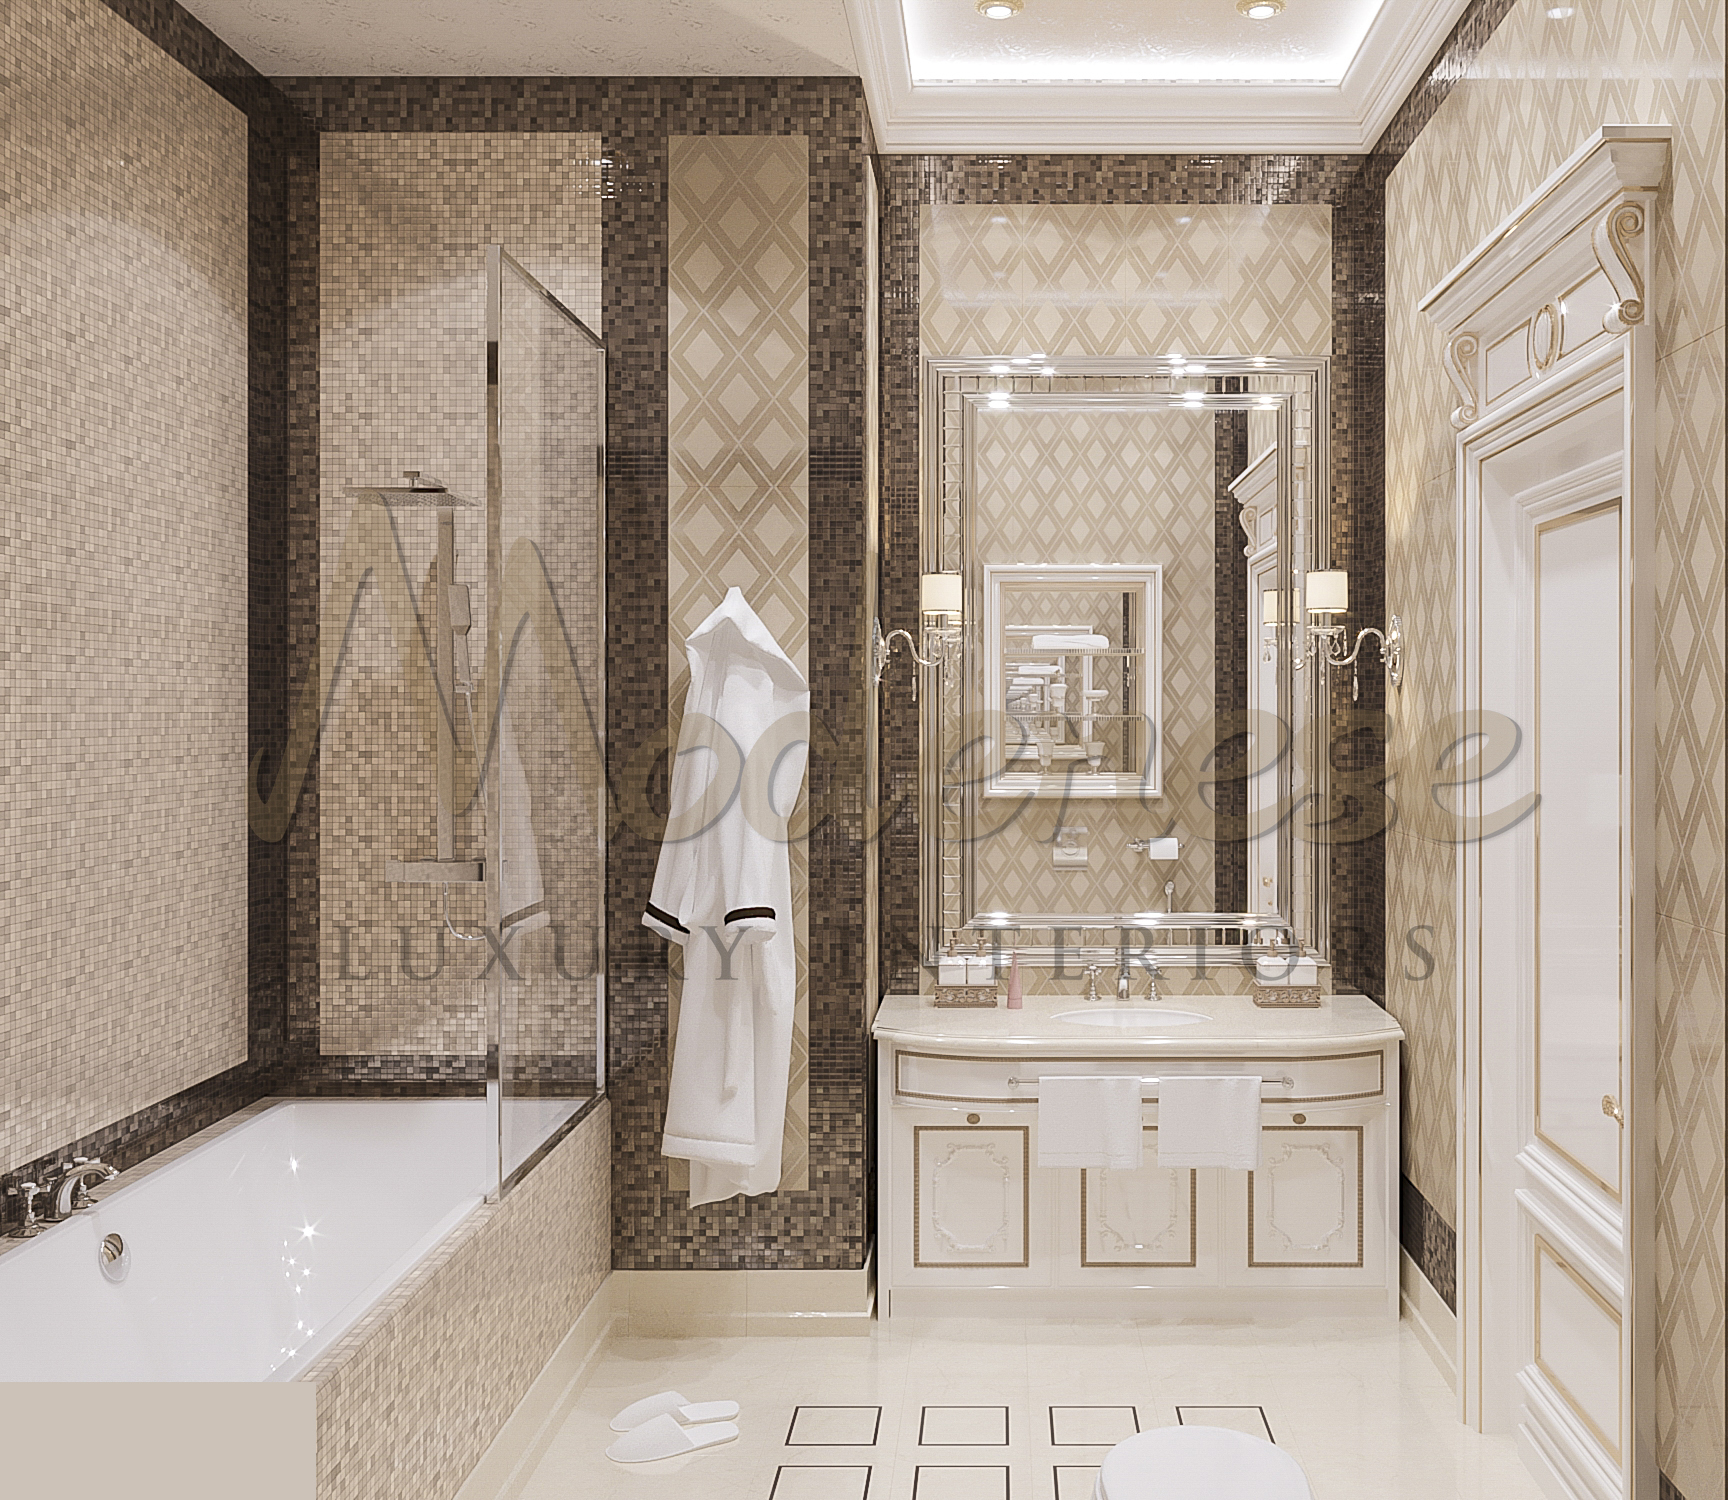 High-end quality,luxury furniture, bathroom design, top quality handmade interiors, artisanal made in Italy furniture production. Turnkey Interior Design Project in Lahore, Pakistan.